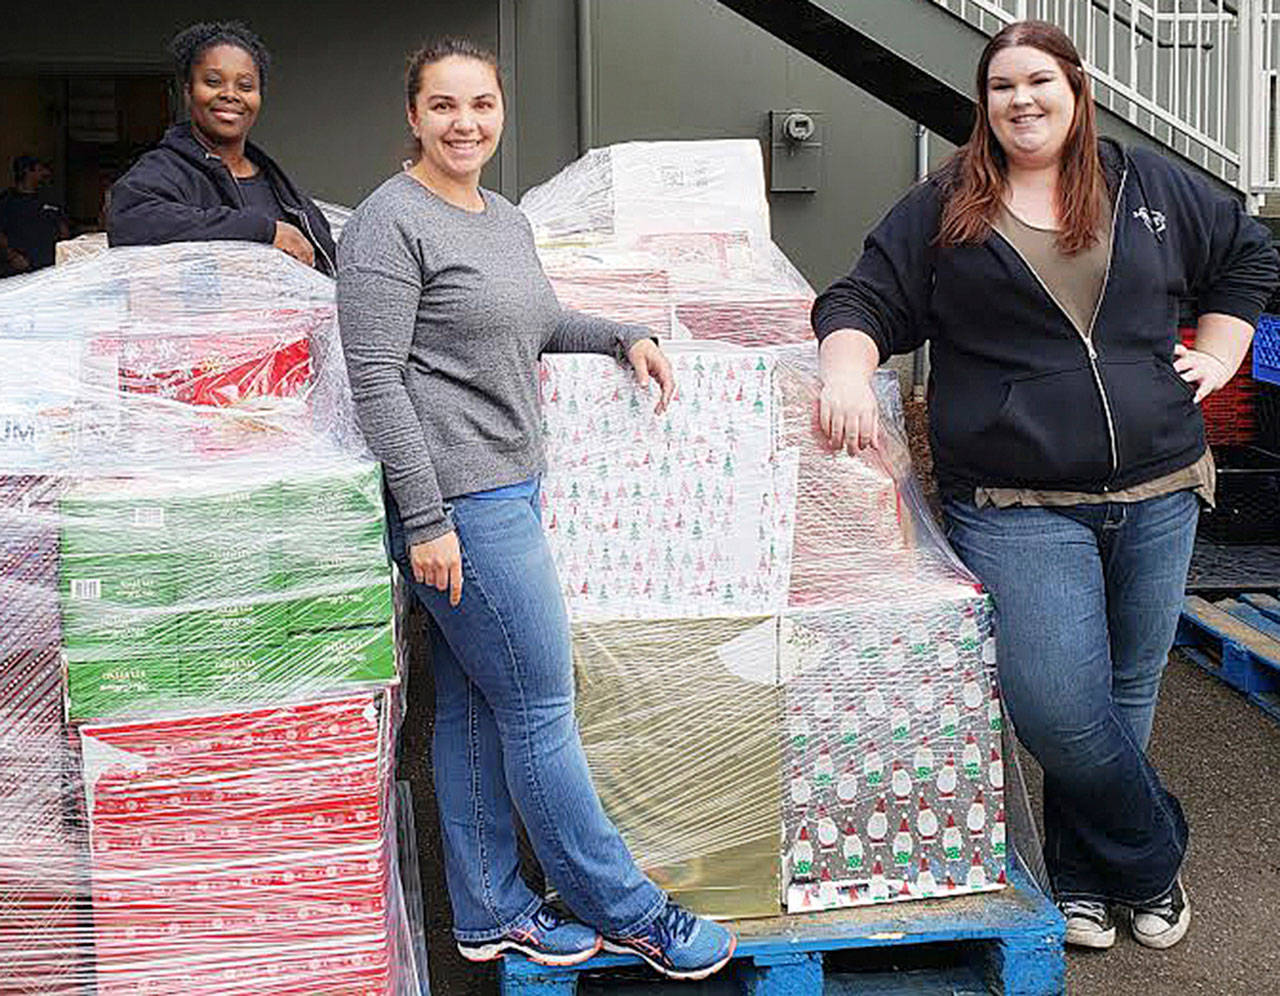 Camico Rivon, Kent Food Bank assistant director, far left, Jeniece Choate, Kent Food Bank executive director and Torklift Central employee Kerstin Stokes prepare last year to sort through donations collected during the Kent Turkey Challenge for the Kent Food Bank. COURTESY PHOTO, Torklift Central